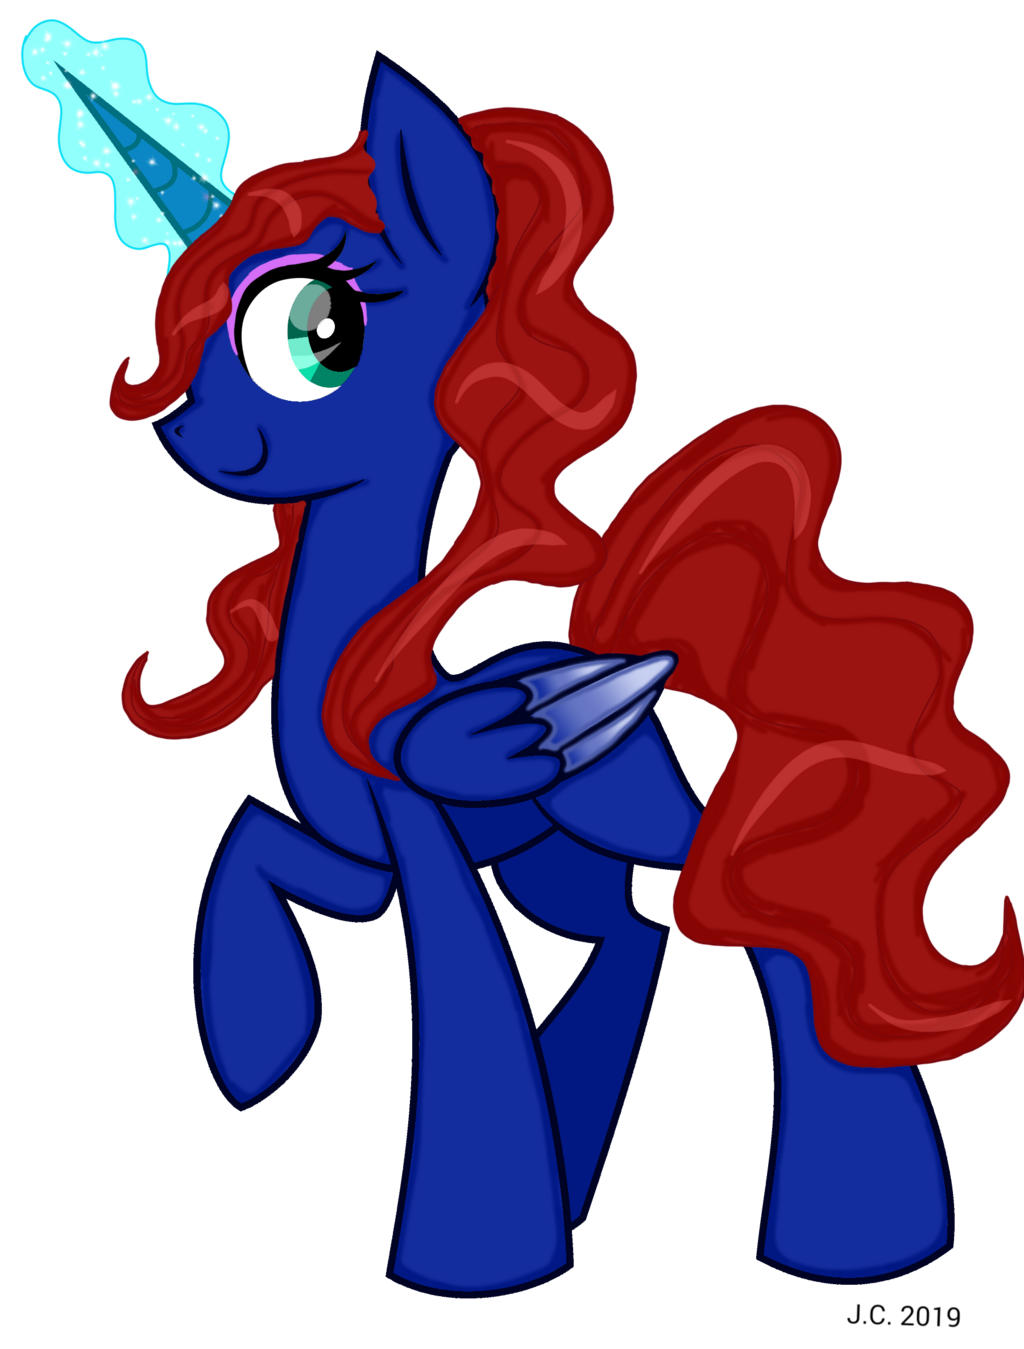 Most recent image: Dya as a pony